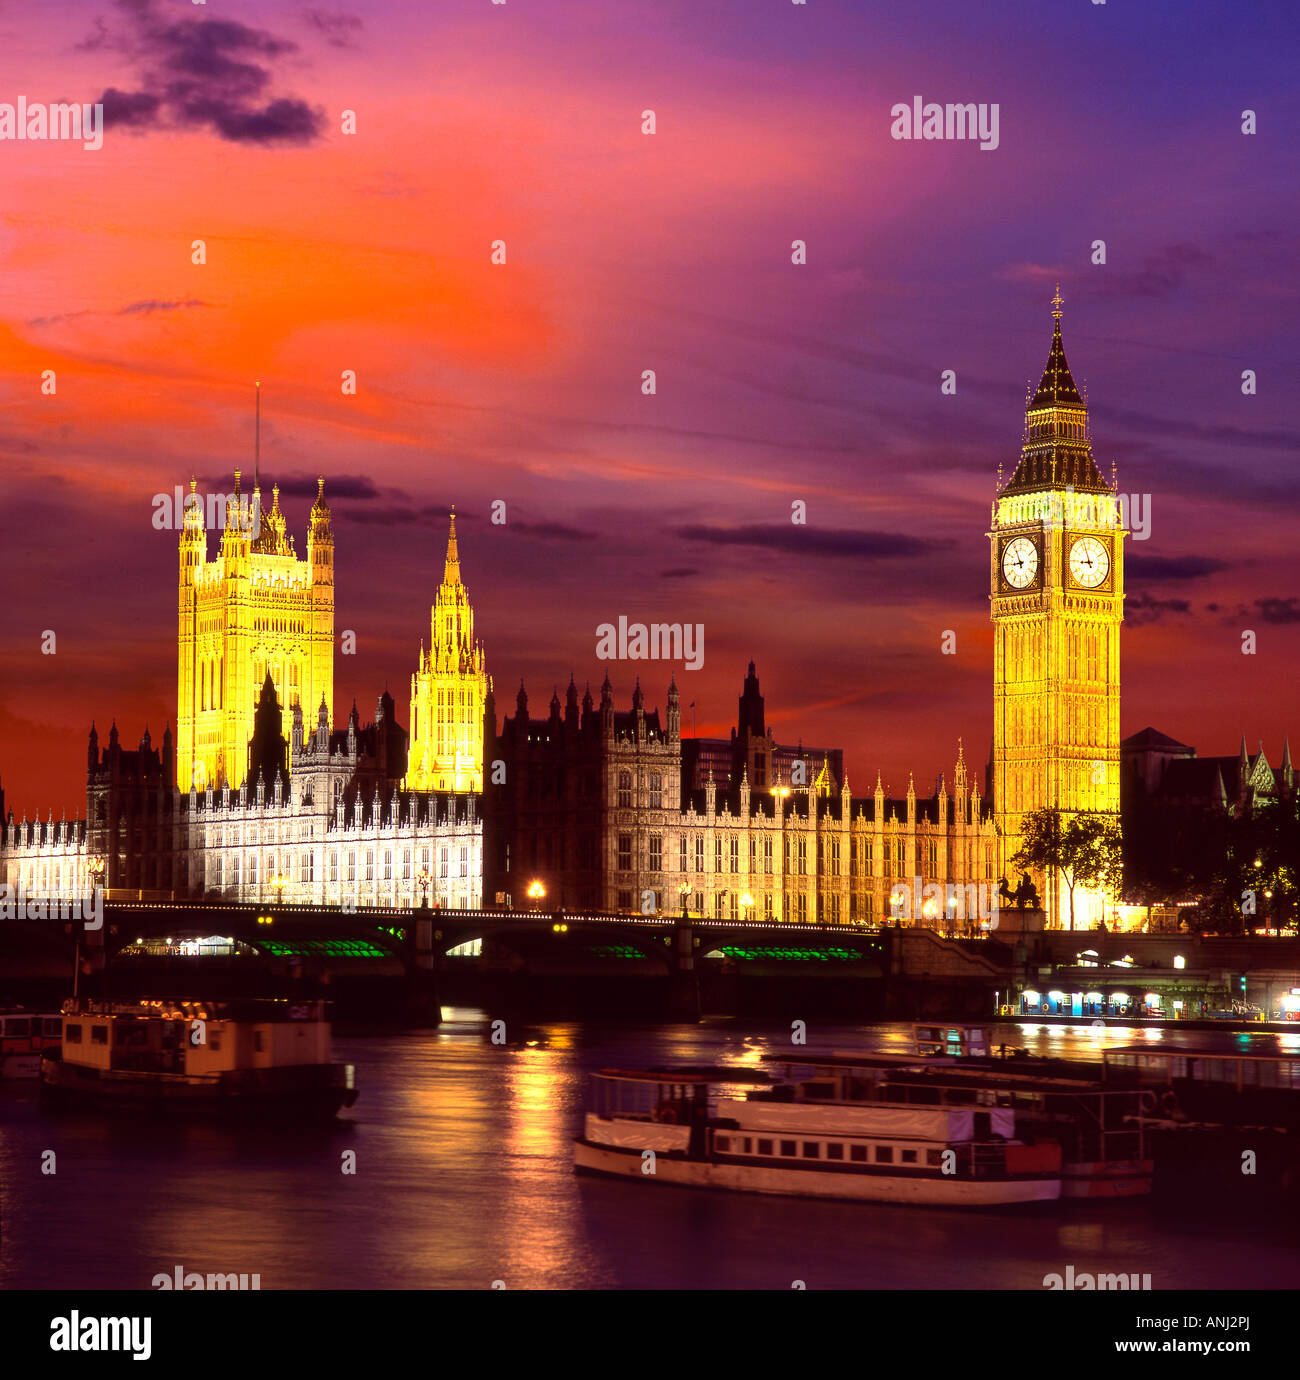 View of the The Houses of Parliament at night across River Thames. Stock Photo